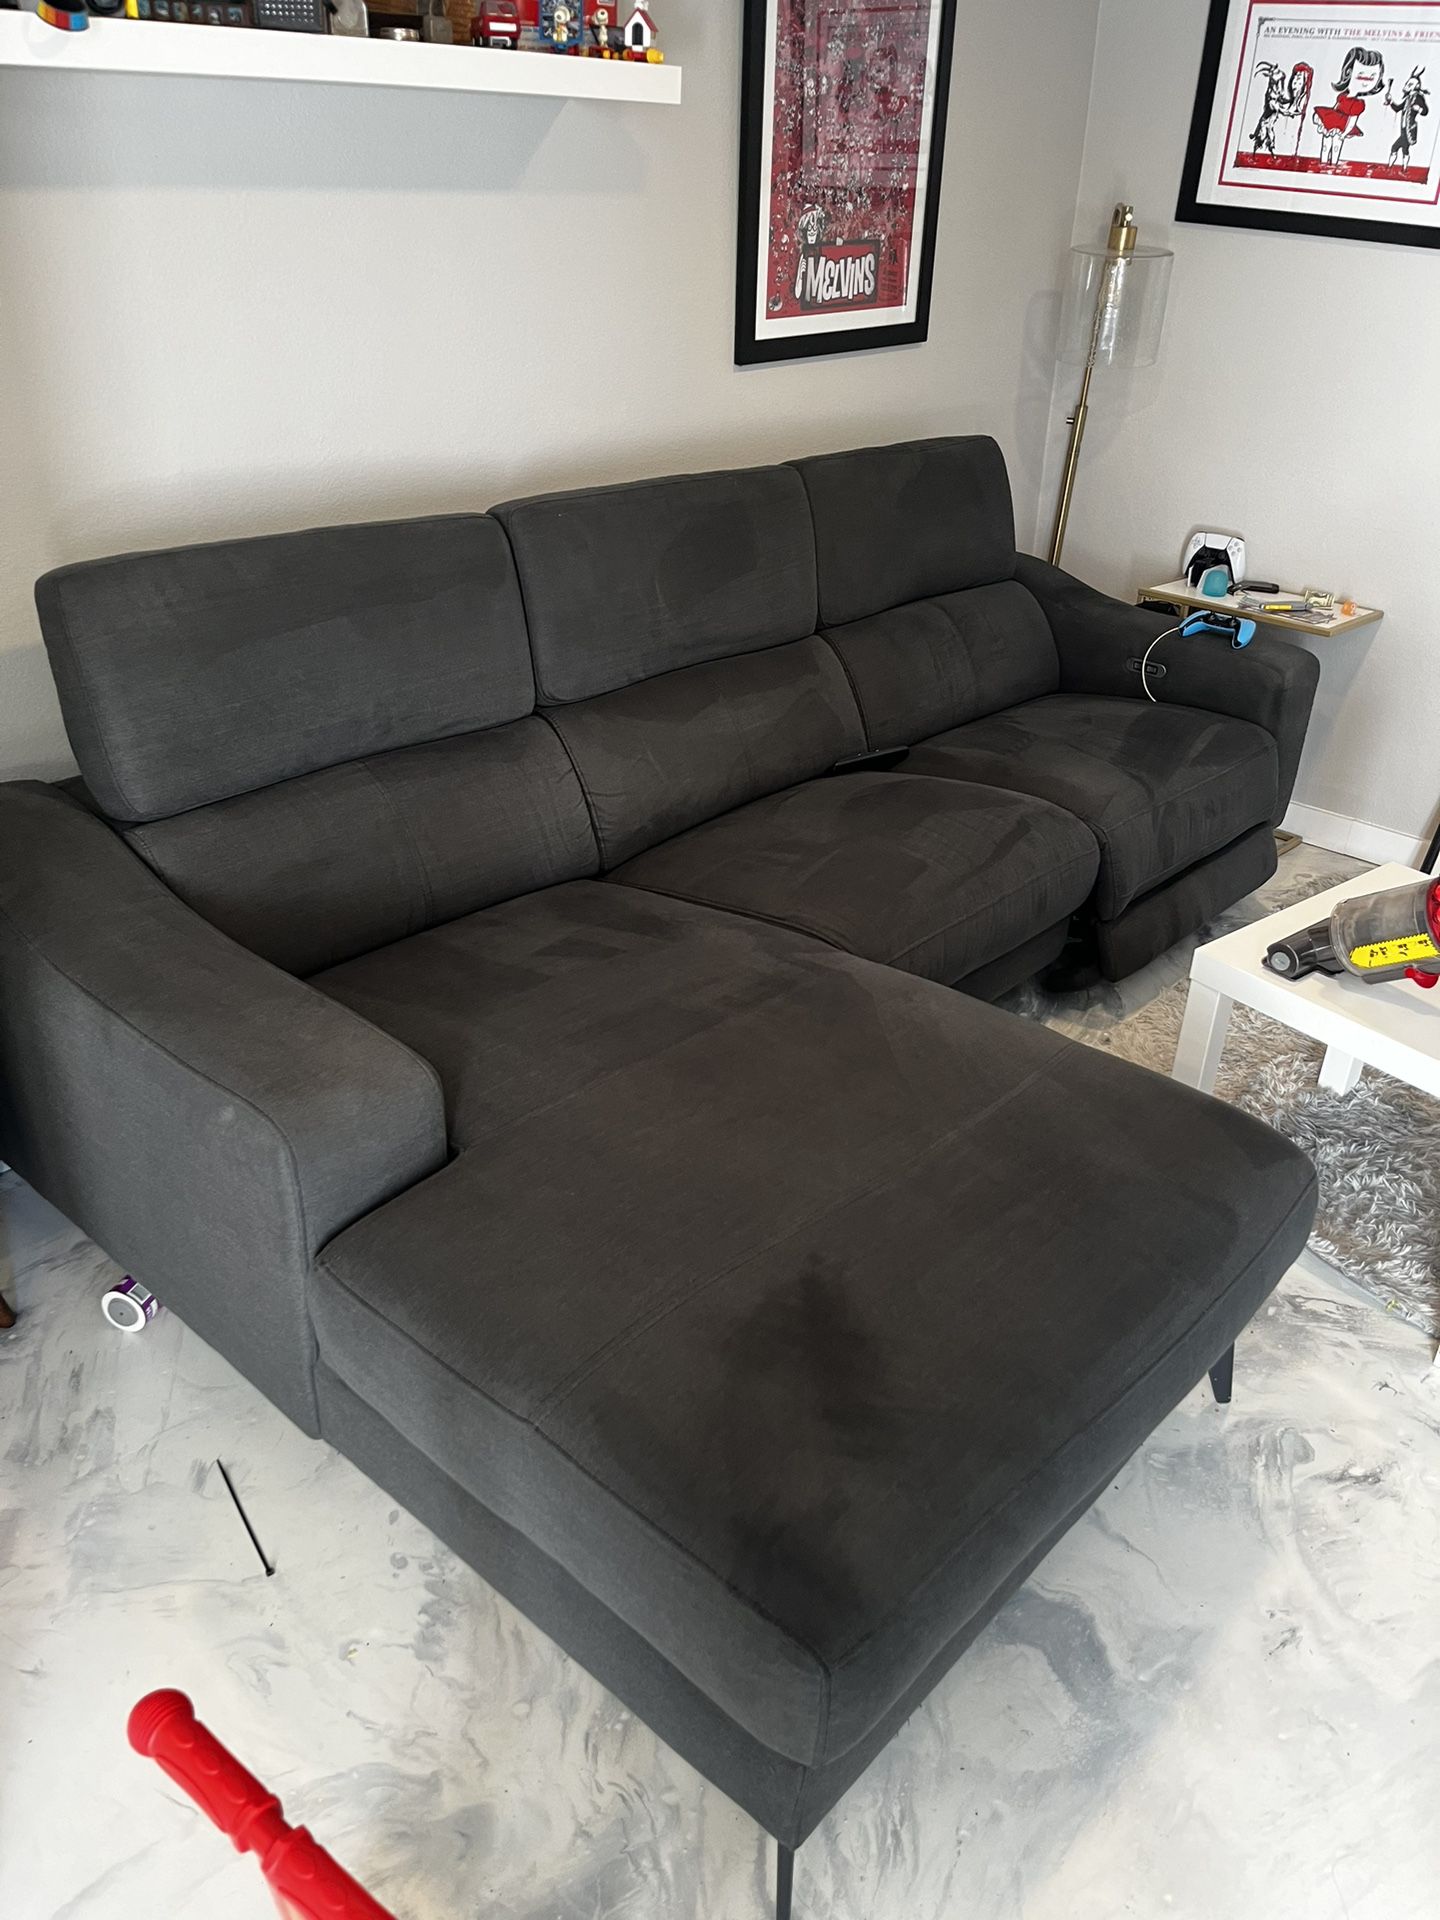 Recclining Chaise Style Couch 